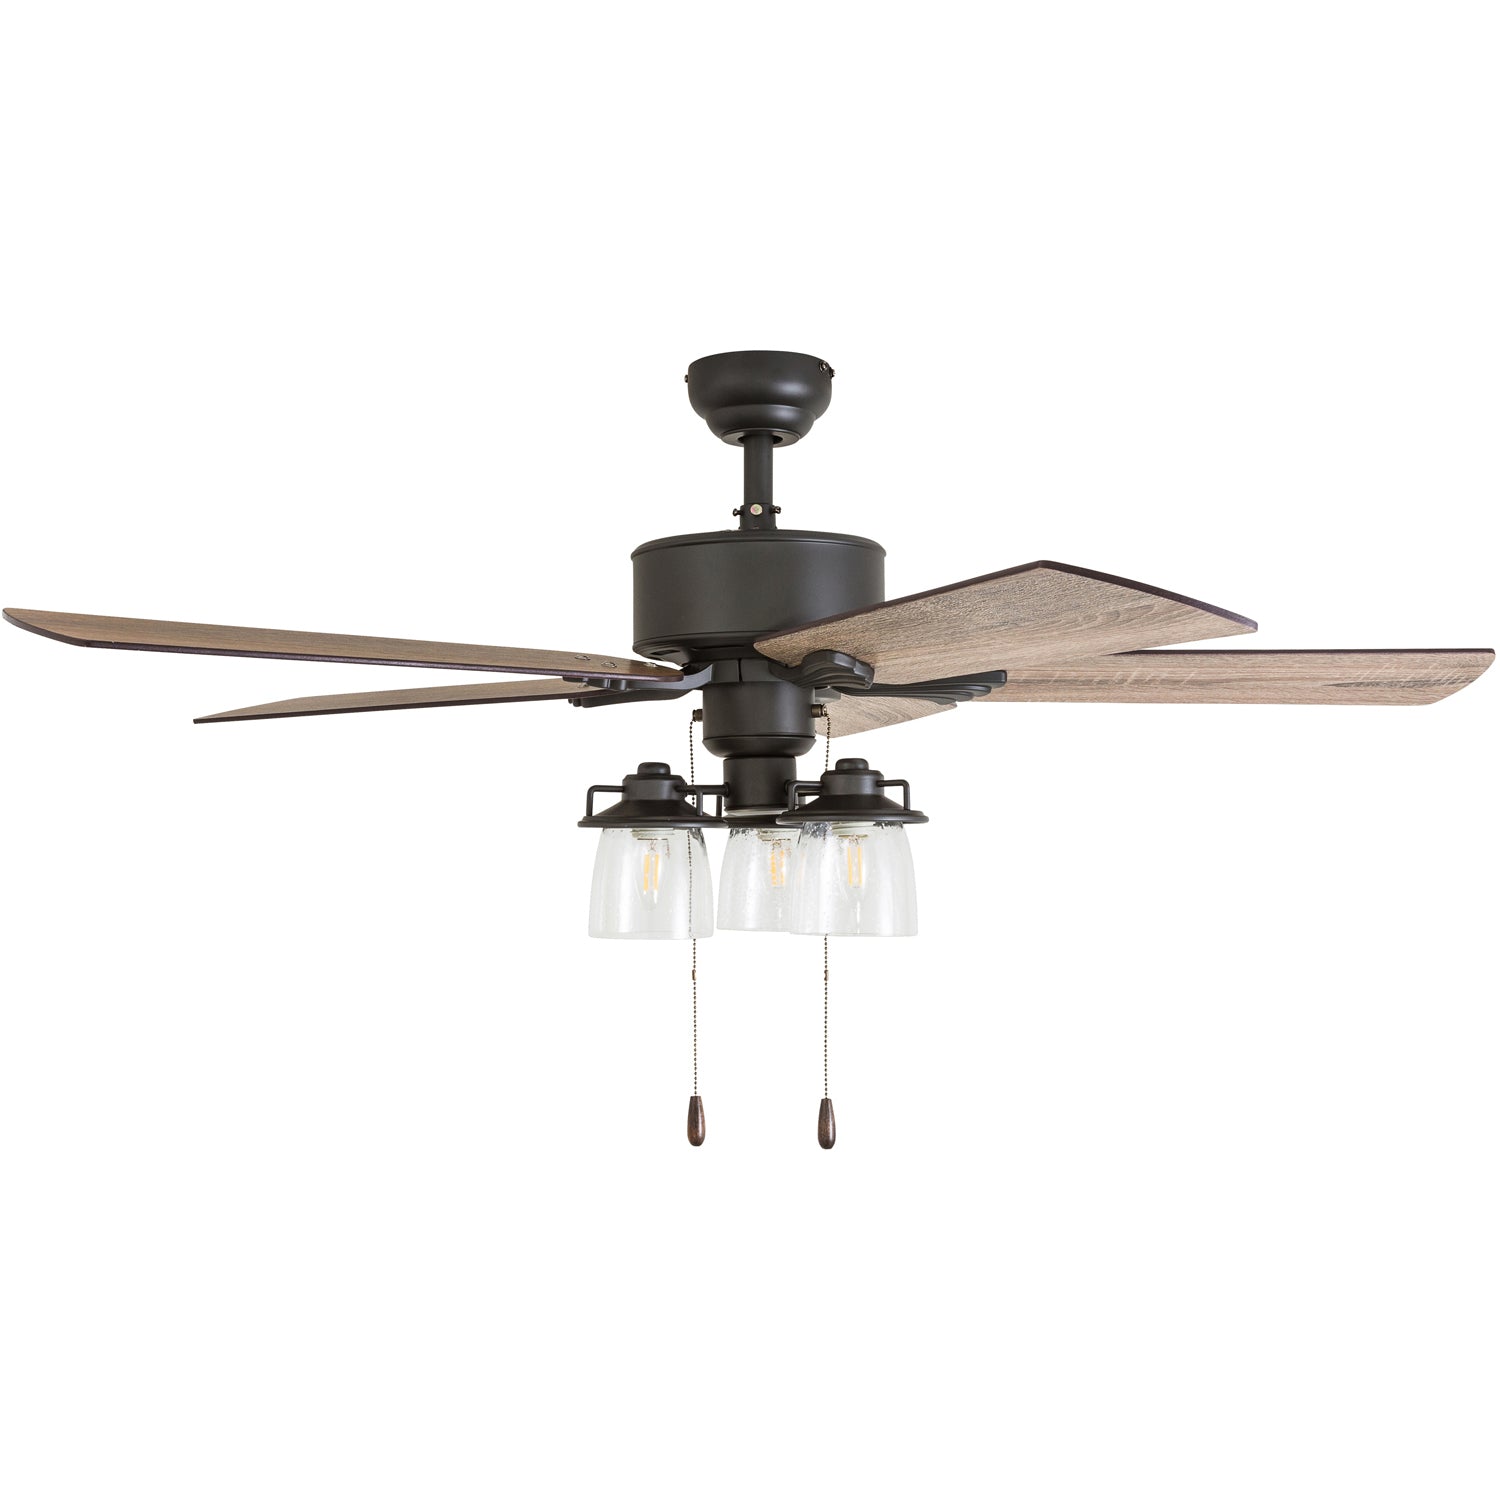 52 Inch River Run, Bronze, Pull Chain, Ceiling Fan by Prominence Home